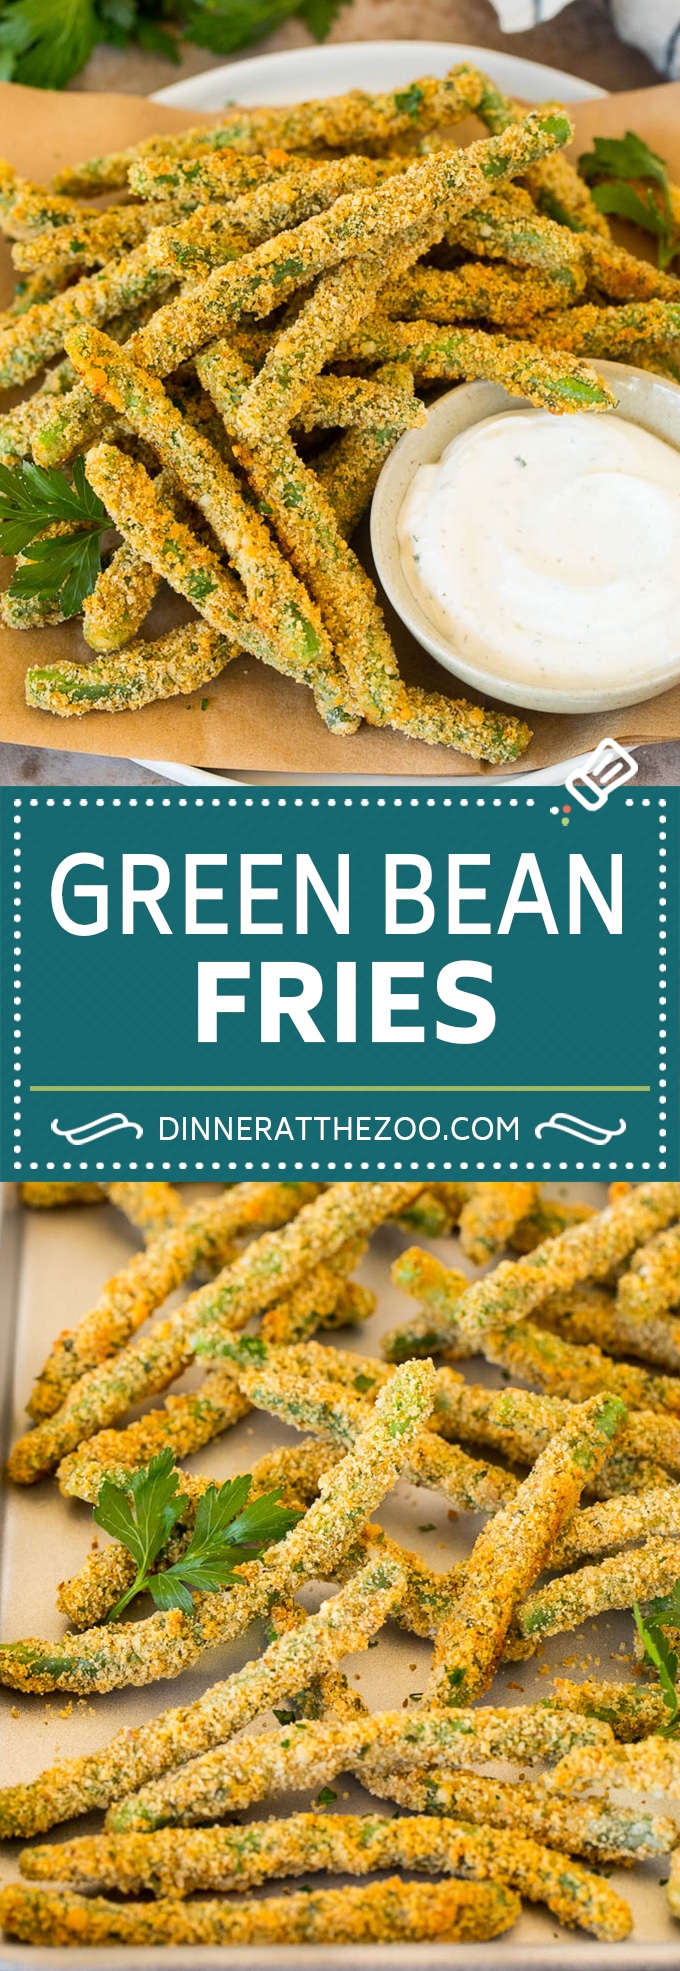 These green bean fries are fresh green beans coated in seasoned breadcrumbs and parmesan cheese, then baked to golden brown perfection.